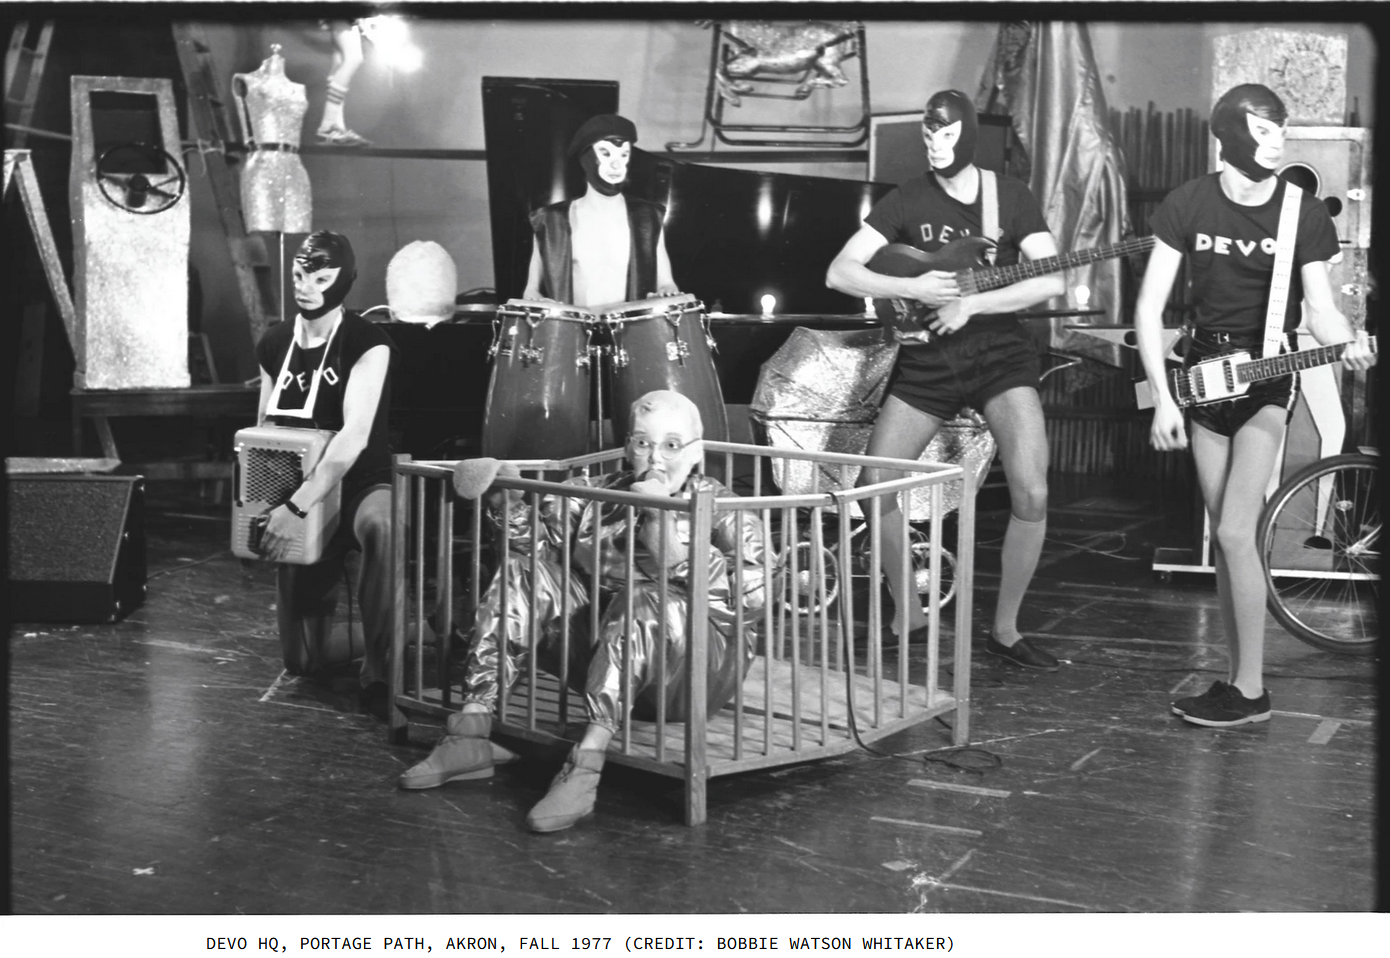 Black and white photo taken at DEVO's headquarters in Akron, Ohio. 4 band members wear rubber ape face masks, black t-shirts with DEVO in block letters, and black short shorts. In the foreground, one member wearing a metallic jumpsuit and a rubber "Booji Boy" mask sits in a baby crib. Text under photo: DEVO HQ, Portage Path, Akron, Fall 1977. Credit Bobbie Watson Whitaker. 